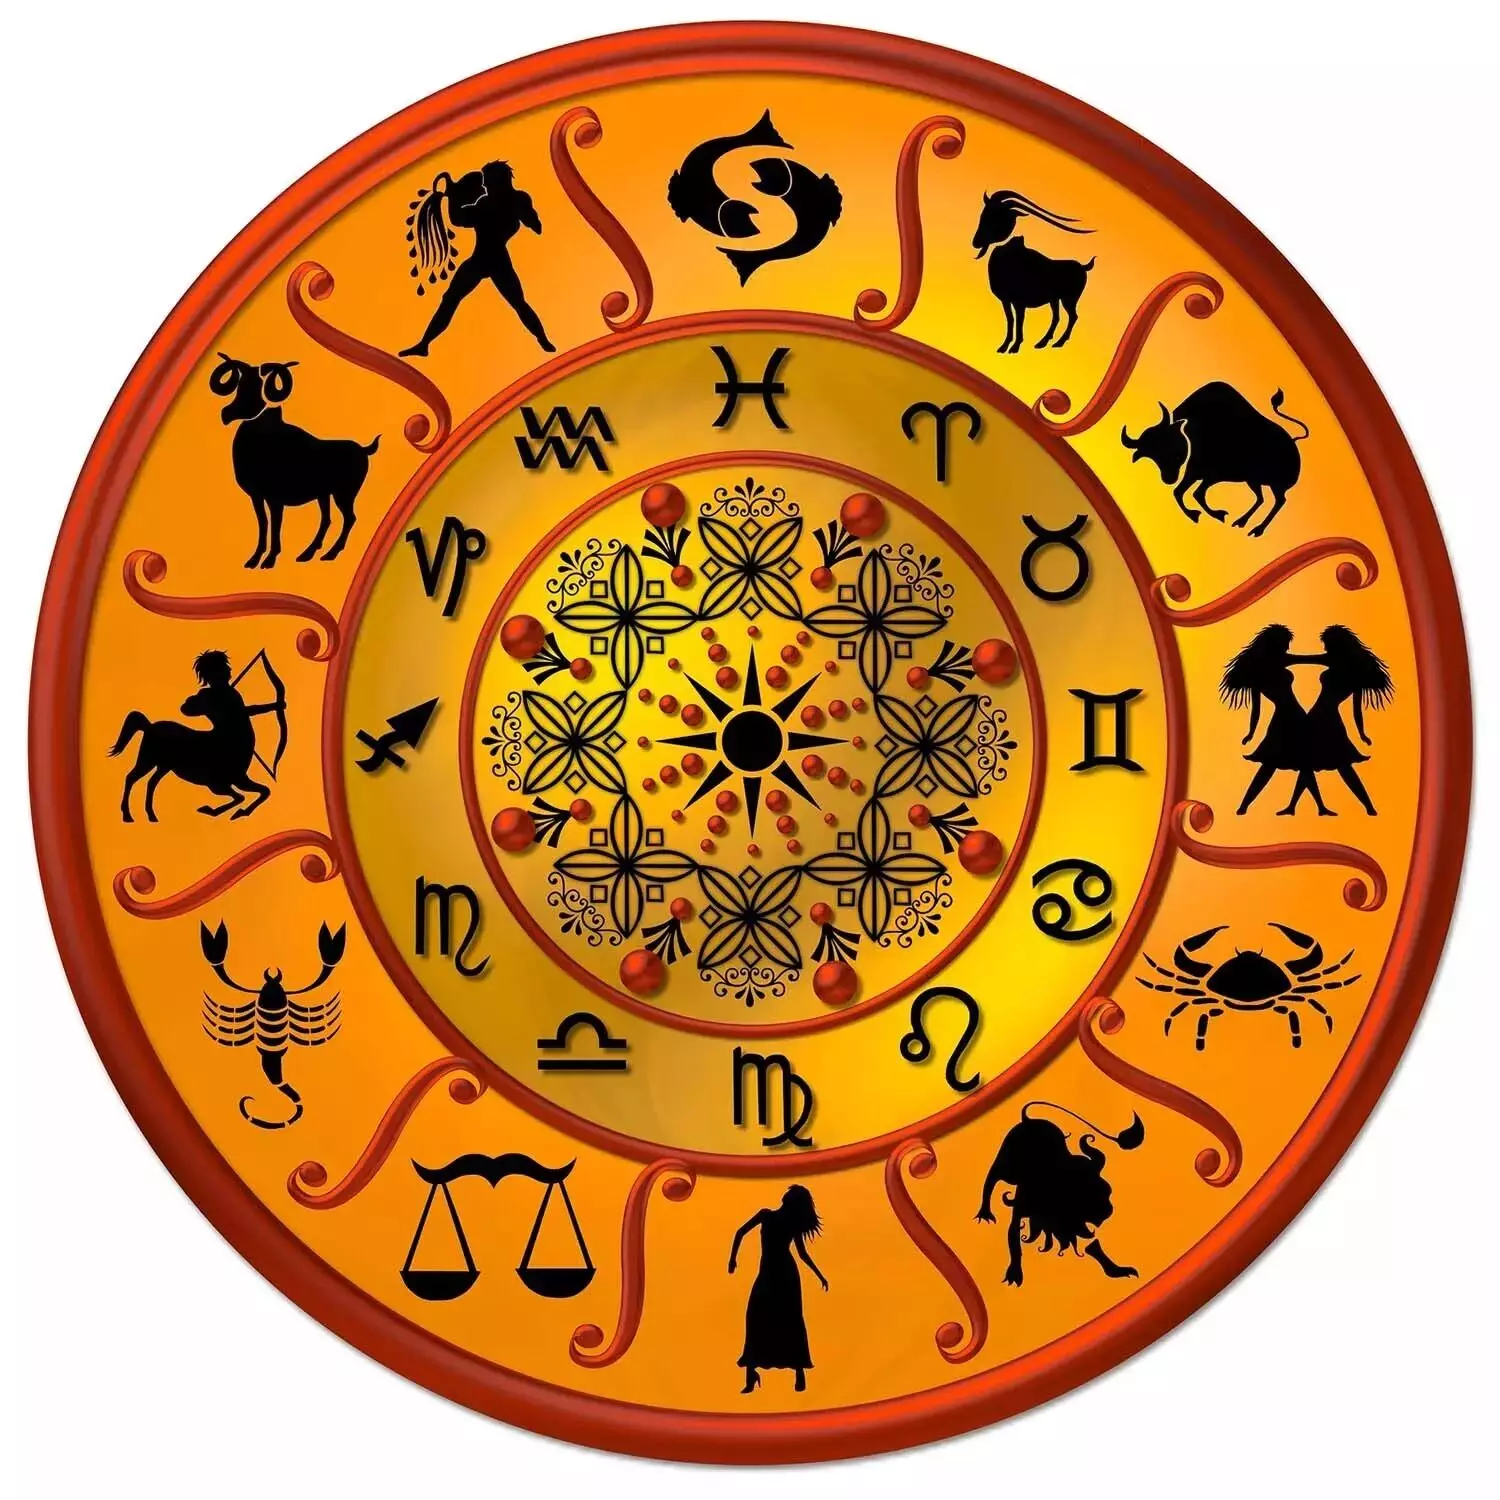 05 October  – Know your todays horoscope